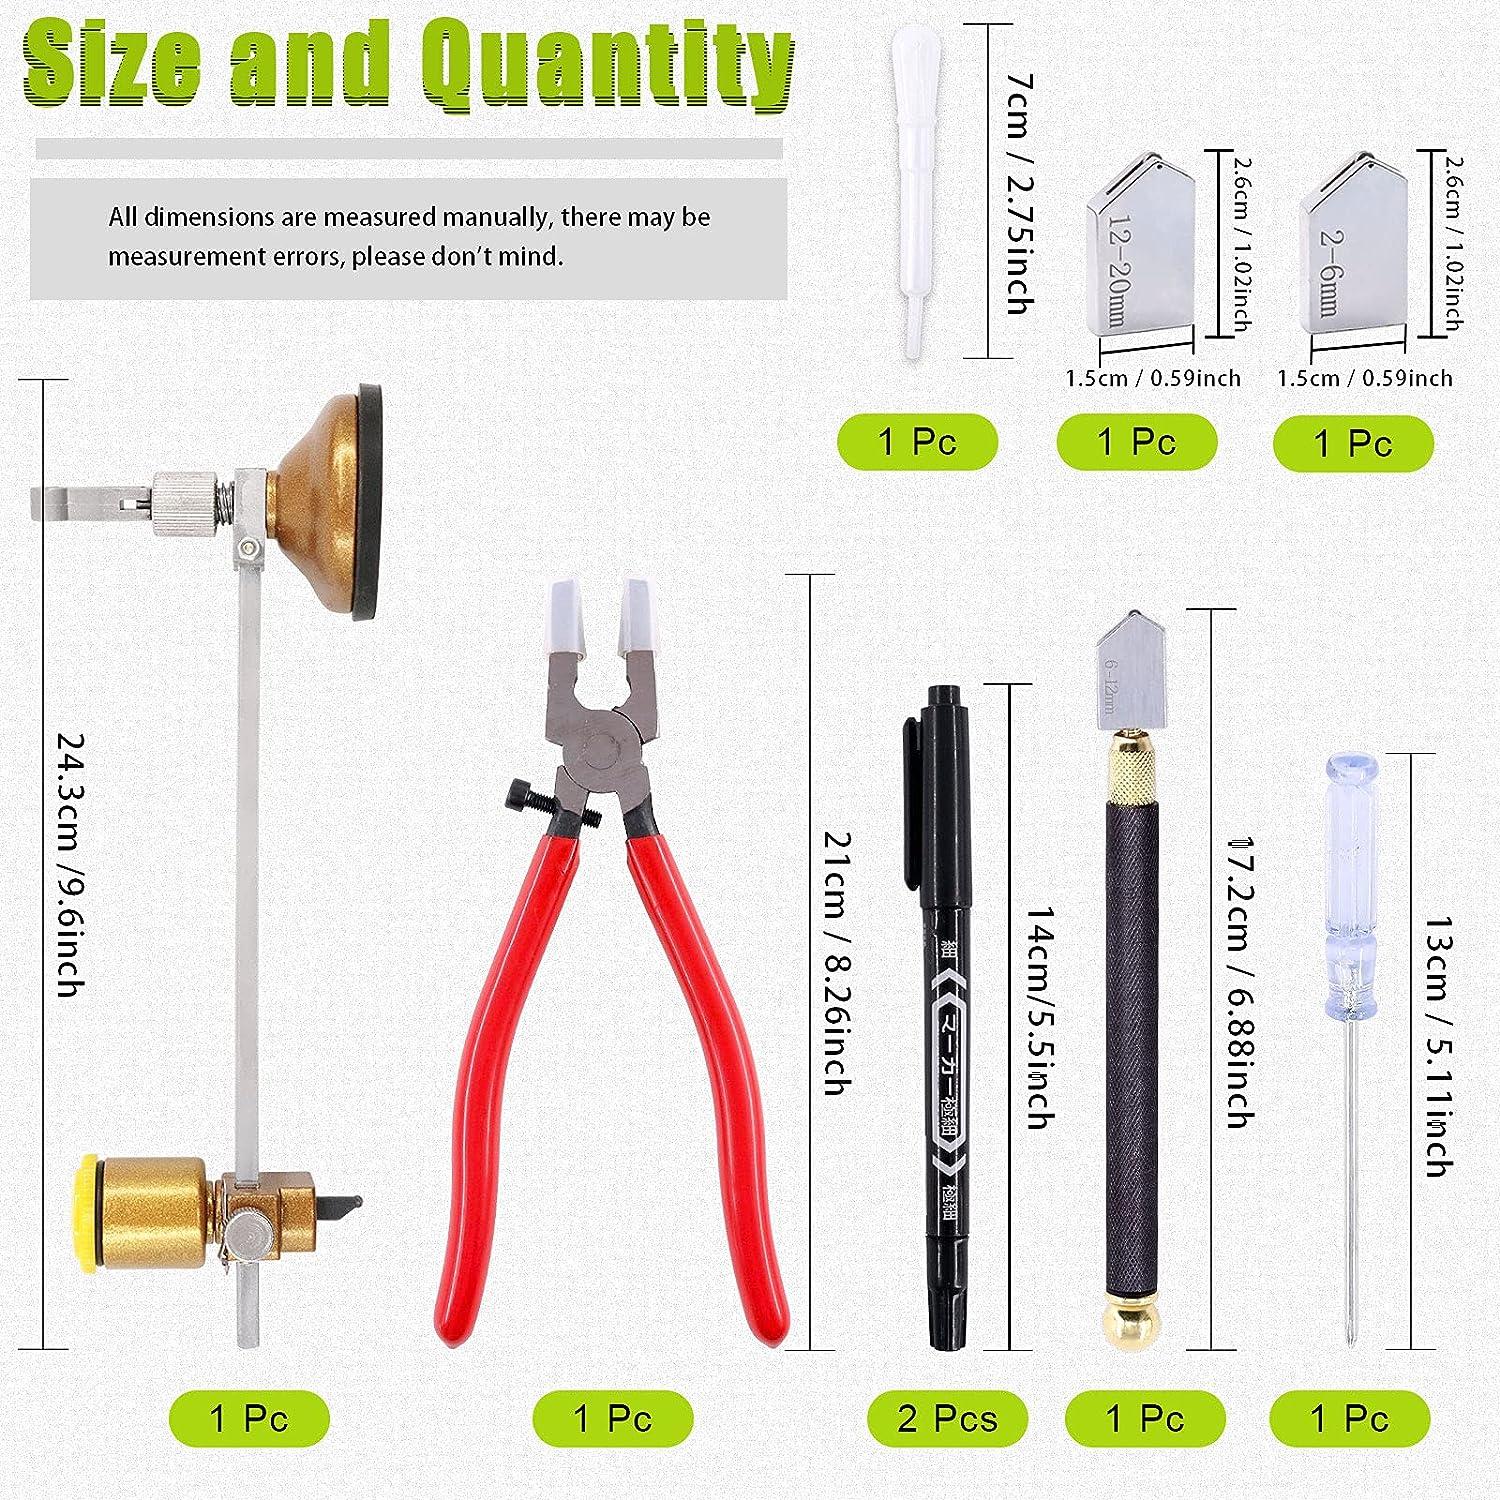 Glass Cutter Tool Set 2mm-20mm Pencil Style Oil Feed Carbide Tip with 2  Bonus Blades and Screwdriver